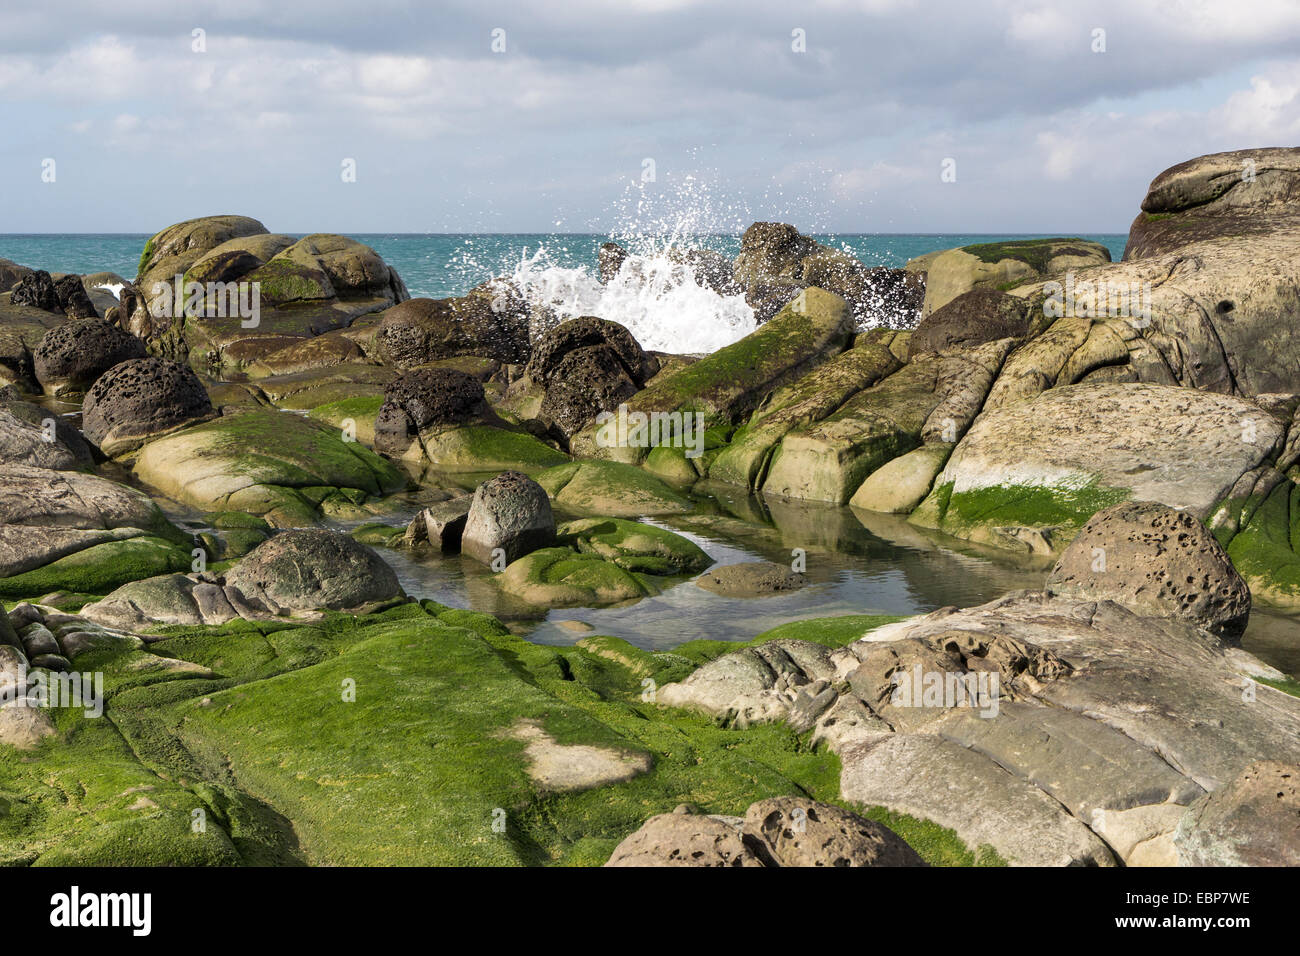 Wave crashing on rocks covered in green seaweed on shore Stock Photo